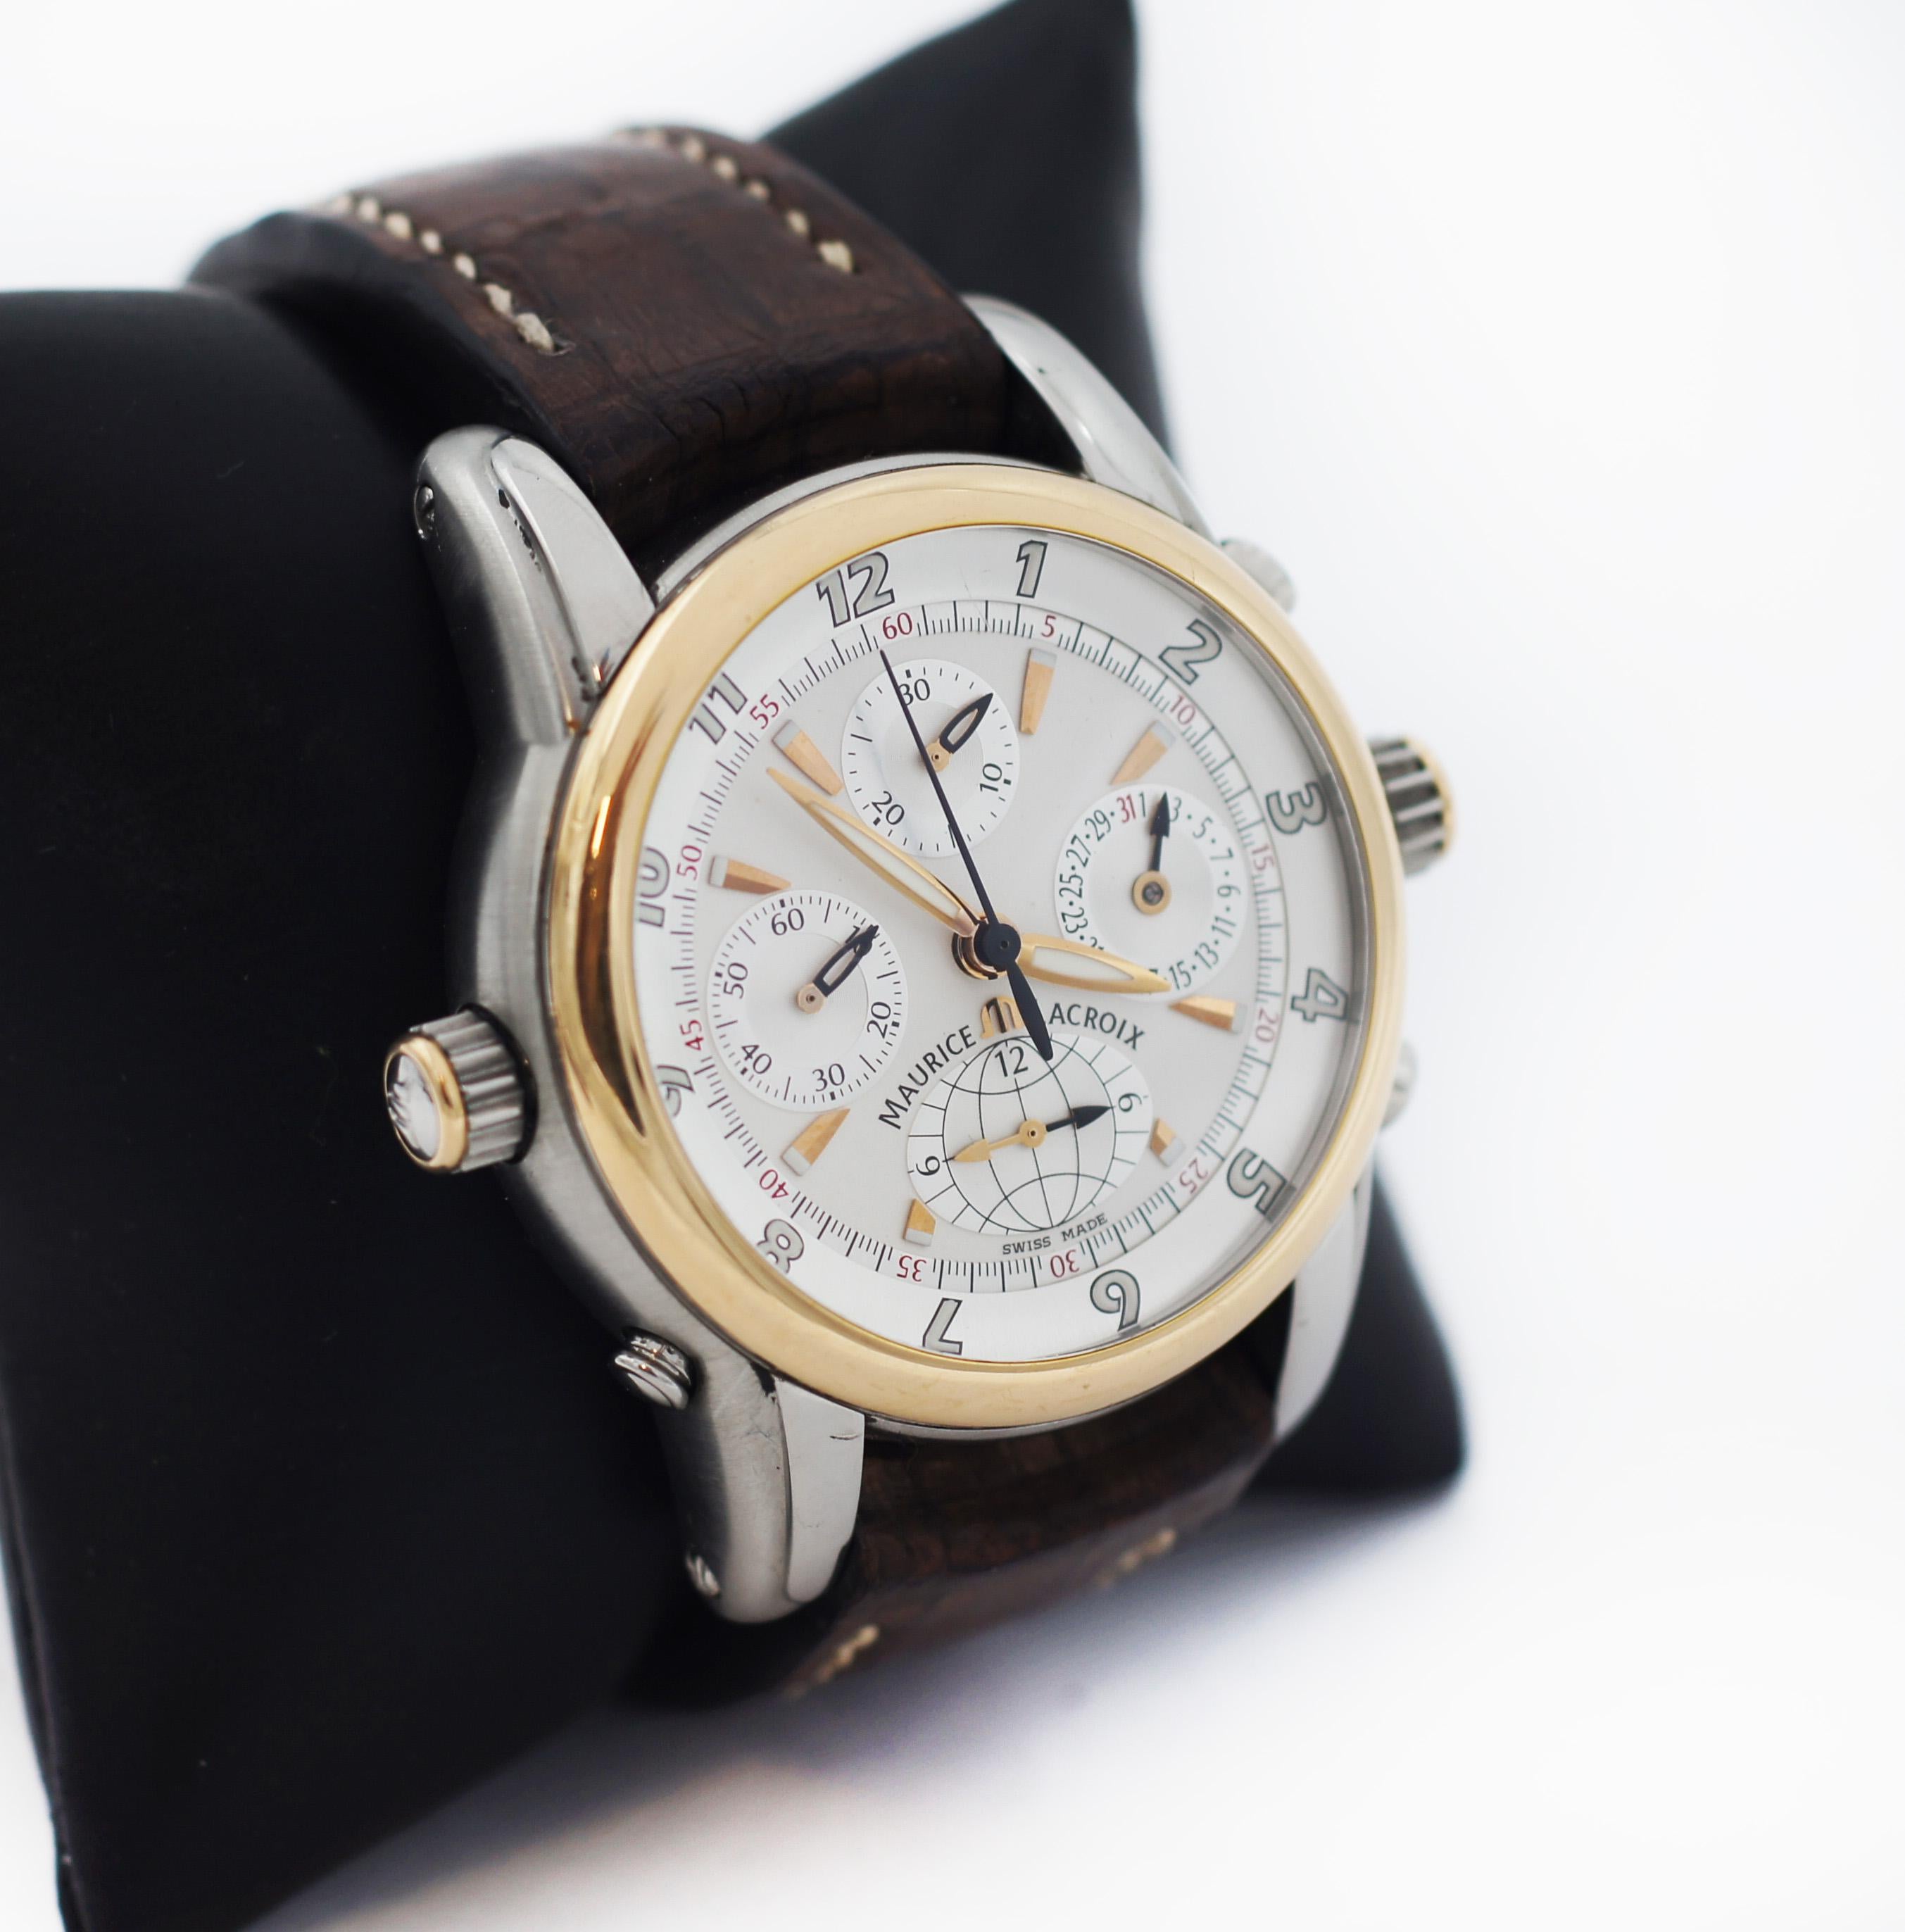 Maurice LaCroix
Model MP6398
Stainless Steel and 18K Gold Case
18K Gold fixed bezel 
White dial
White and black lined Arabic numerals, golden hour markers and hands
Luminescent hour, minute, hand and has second hands
Features Chronograph sub-dial